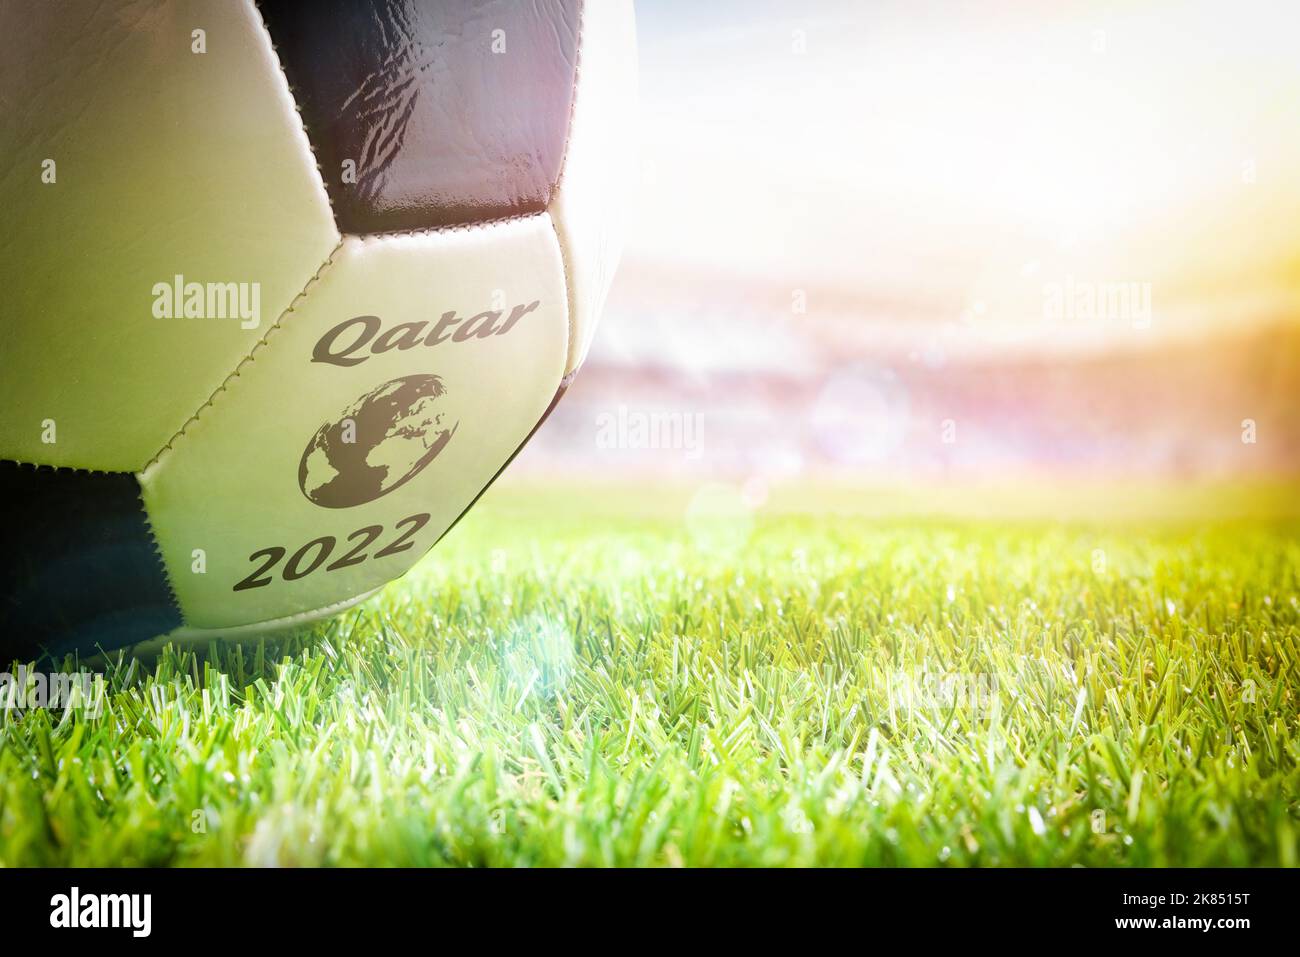 Detail of a ball on the grass of a soccer stadium announcing the world cup tournament in Qatar 2022. Stock Photo